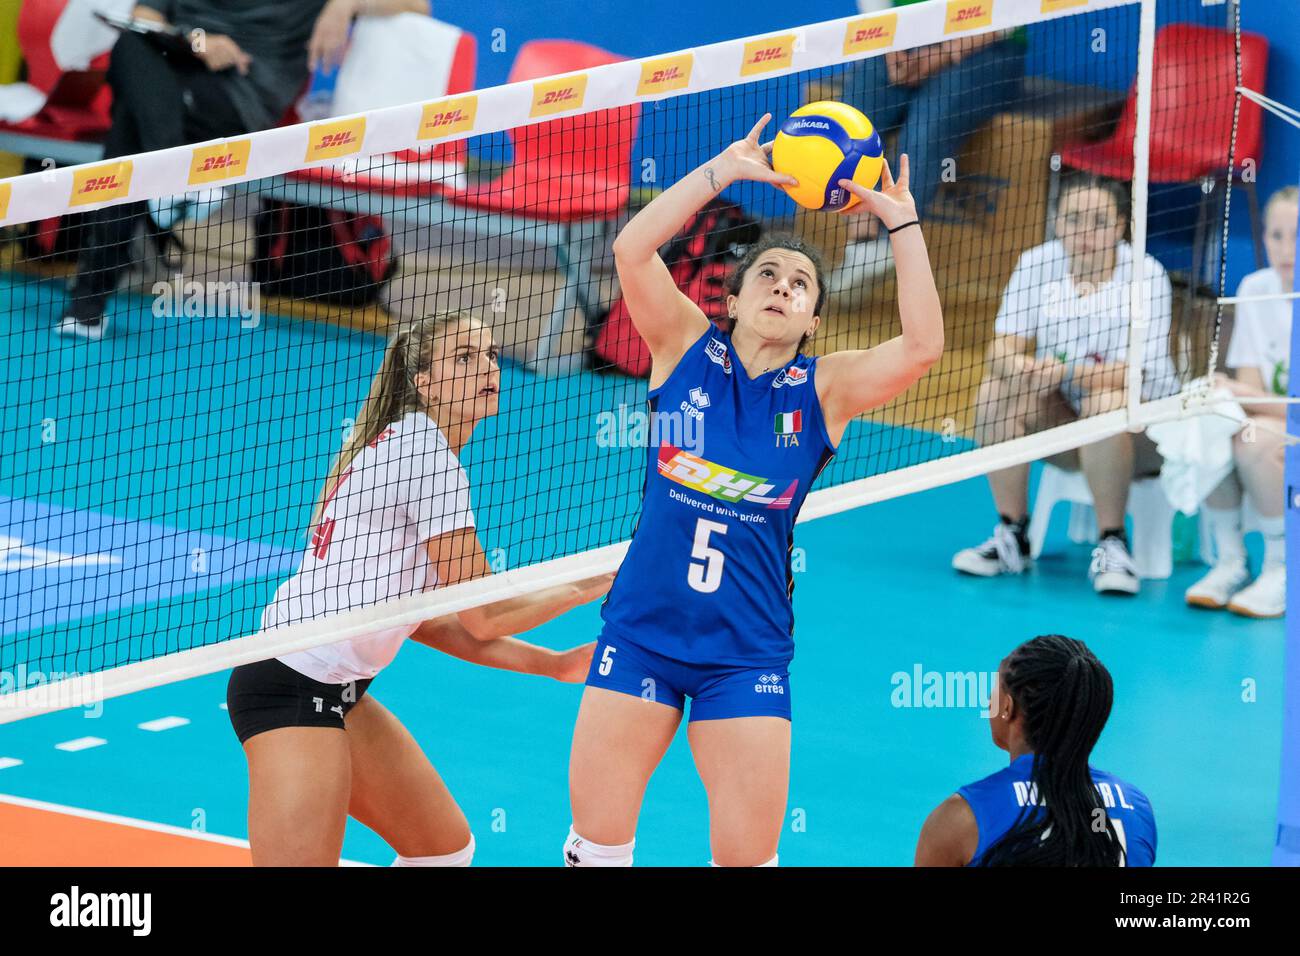 Ilaria Battistoni of Italy in action during the DHL Test Match Tournament women’s volleyball between Italy and Canada at Palazzetto dello Sport. Final score; Italy 3:1 Canada. Stock Photo